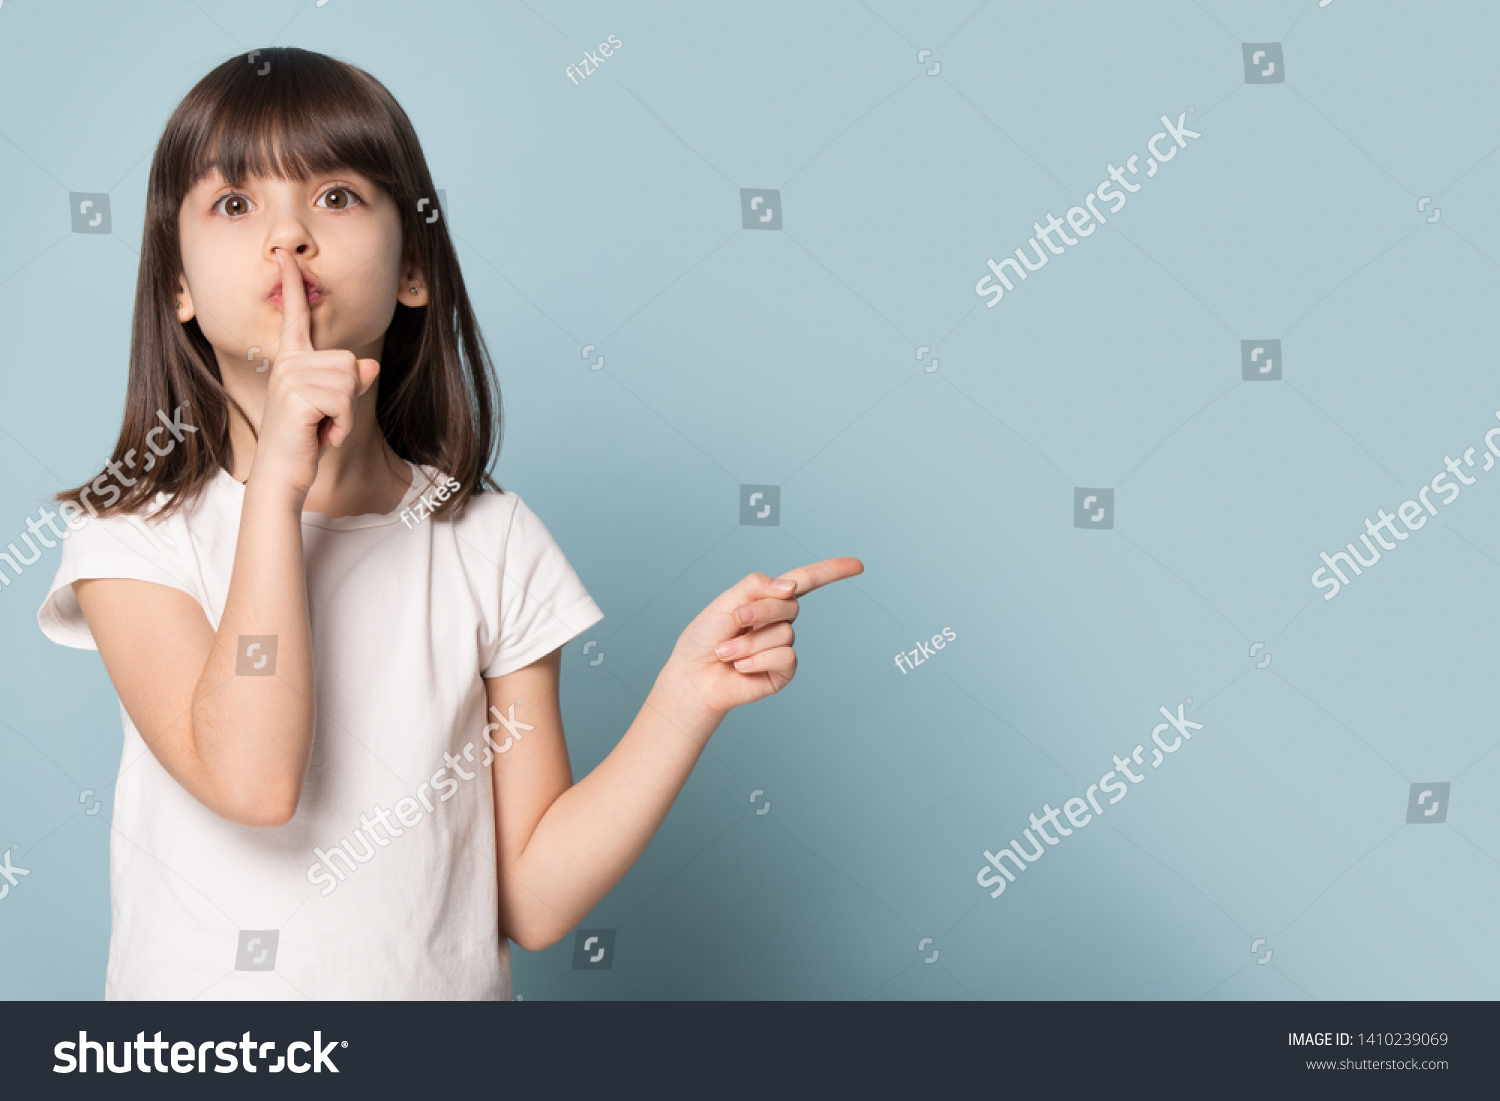 Adorable six years old little girl holding finger on lips symbol of hush gesture of asking to be quiet. Silence or secret concept image isolated on blue studio background with copy free space for text #1410239069